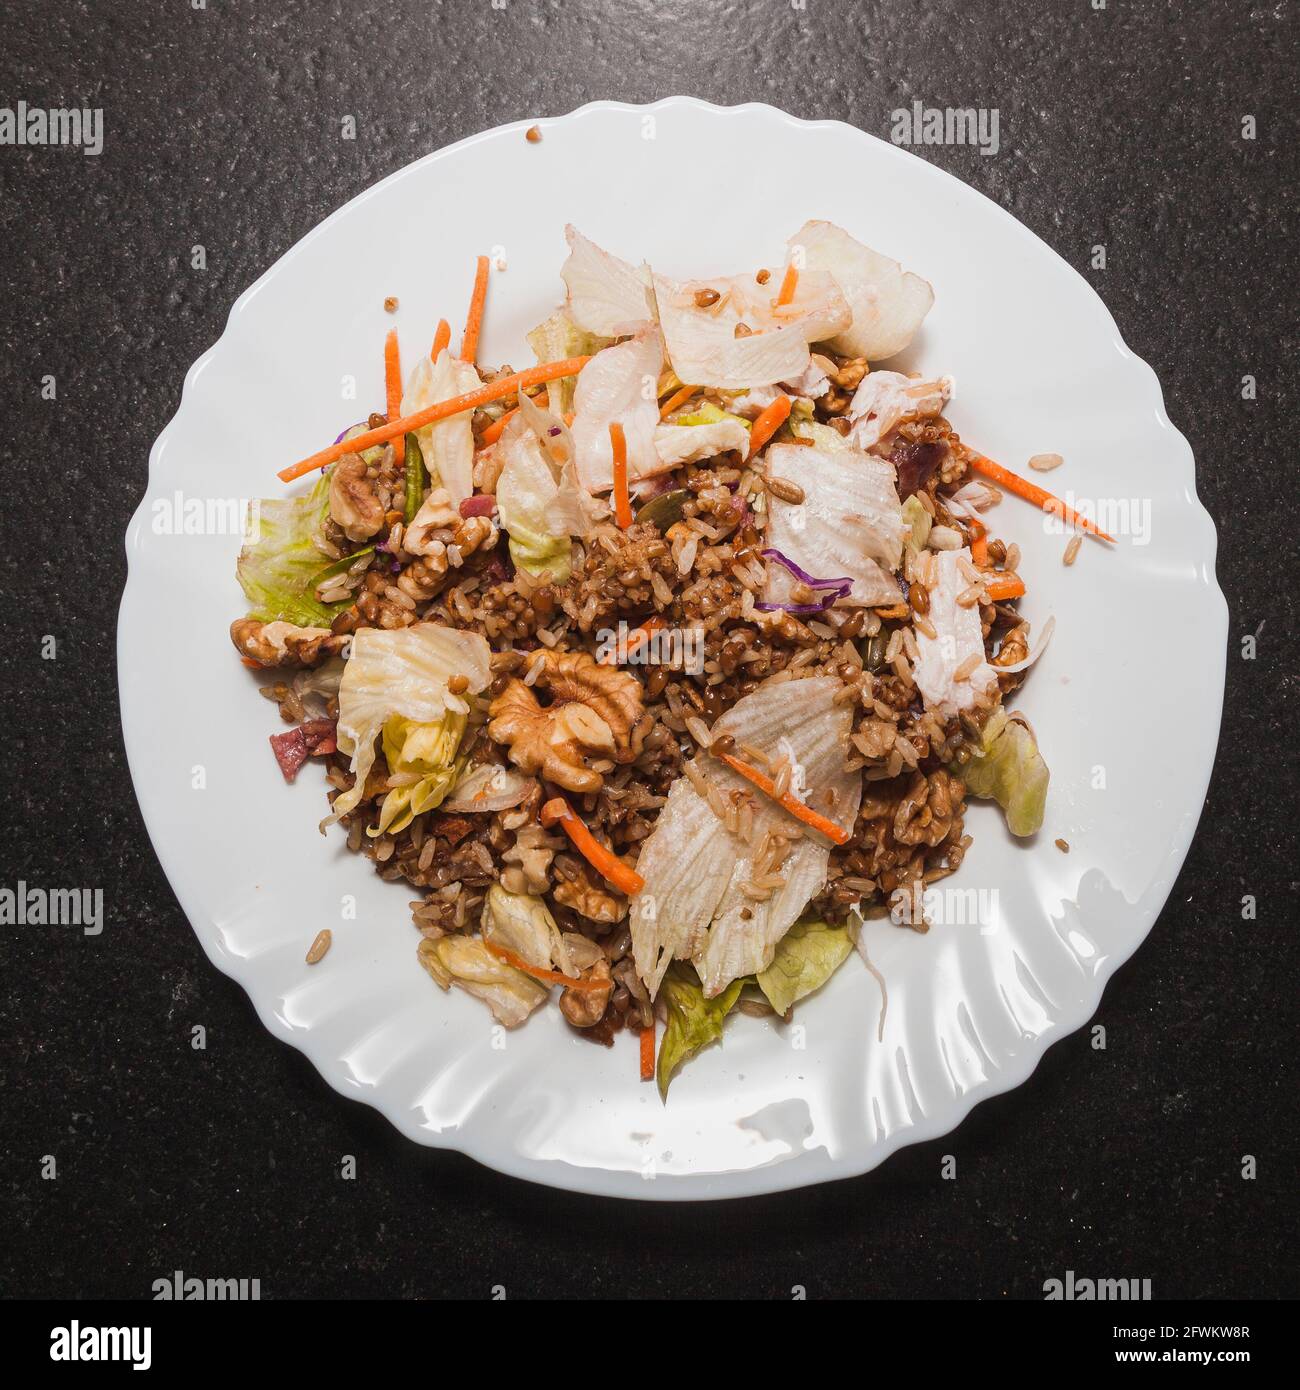 Salad with lettuce, carrot, onion, ham, pumpkin and sunflower seeds, brown rice, chicken, oil and salt Stock Photo